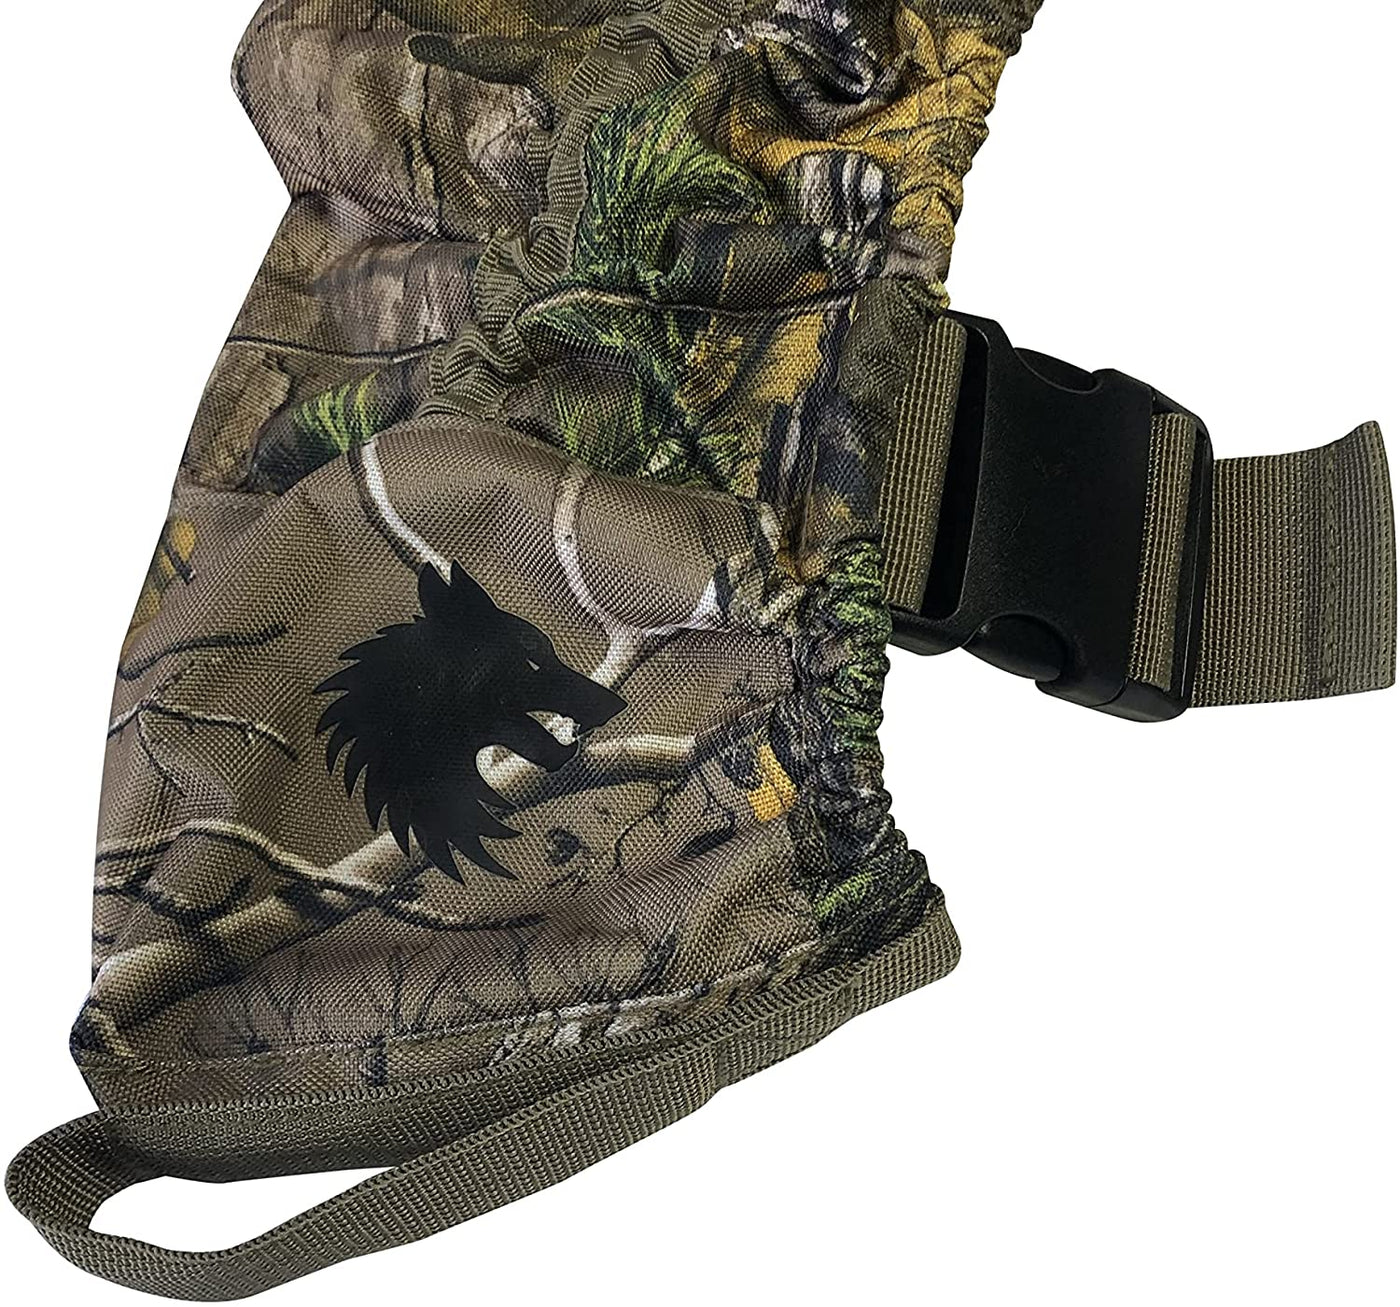 GUNSLINGER Soft Rifle Cover Case, Universal, Water Resistant, Quick Draw, Elastic Rifle Weapons Cover, Gunslinger